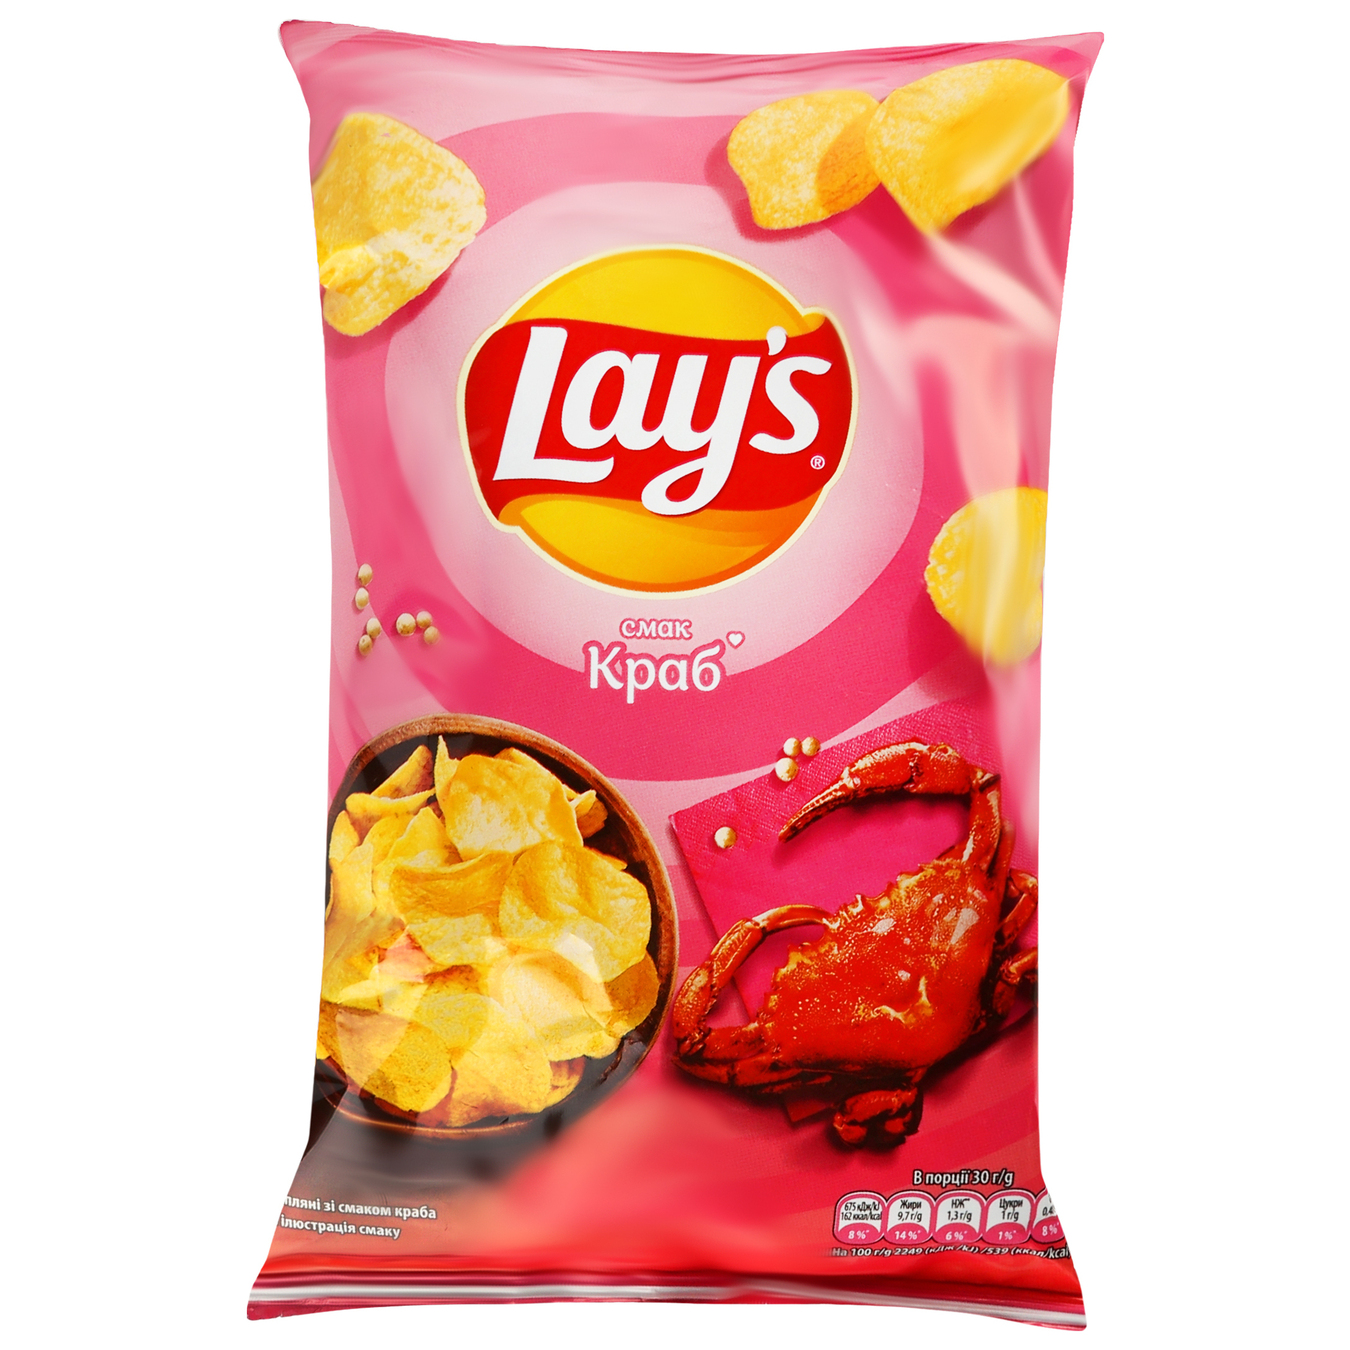 Potato chips Lay's crab flavor 60g